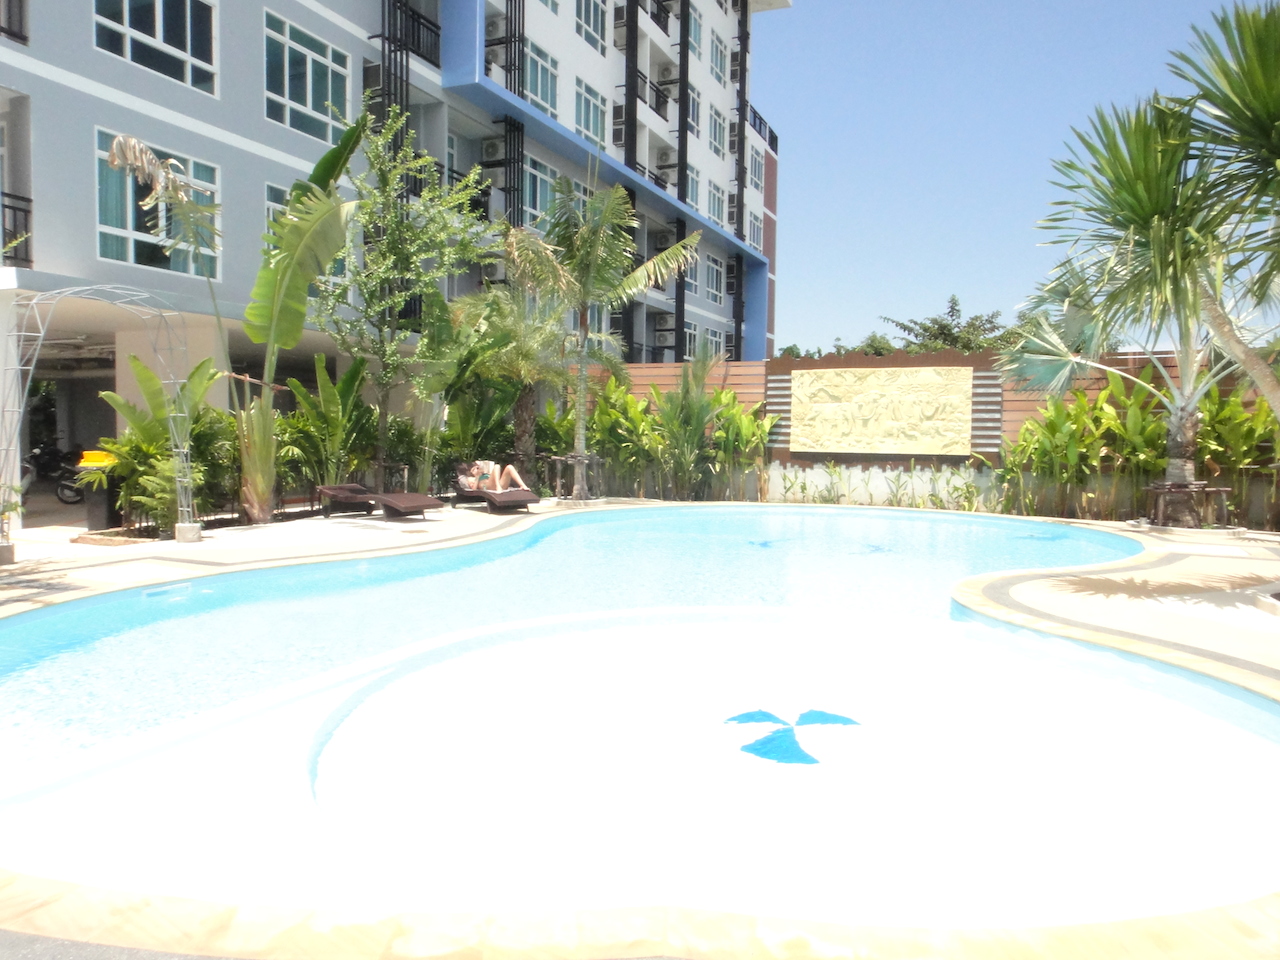 1 bedroom apartment inside Chalong pool complex